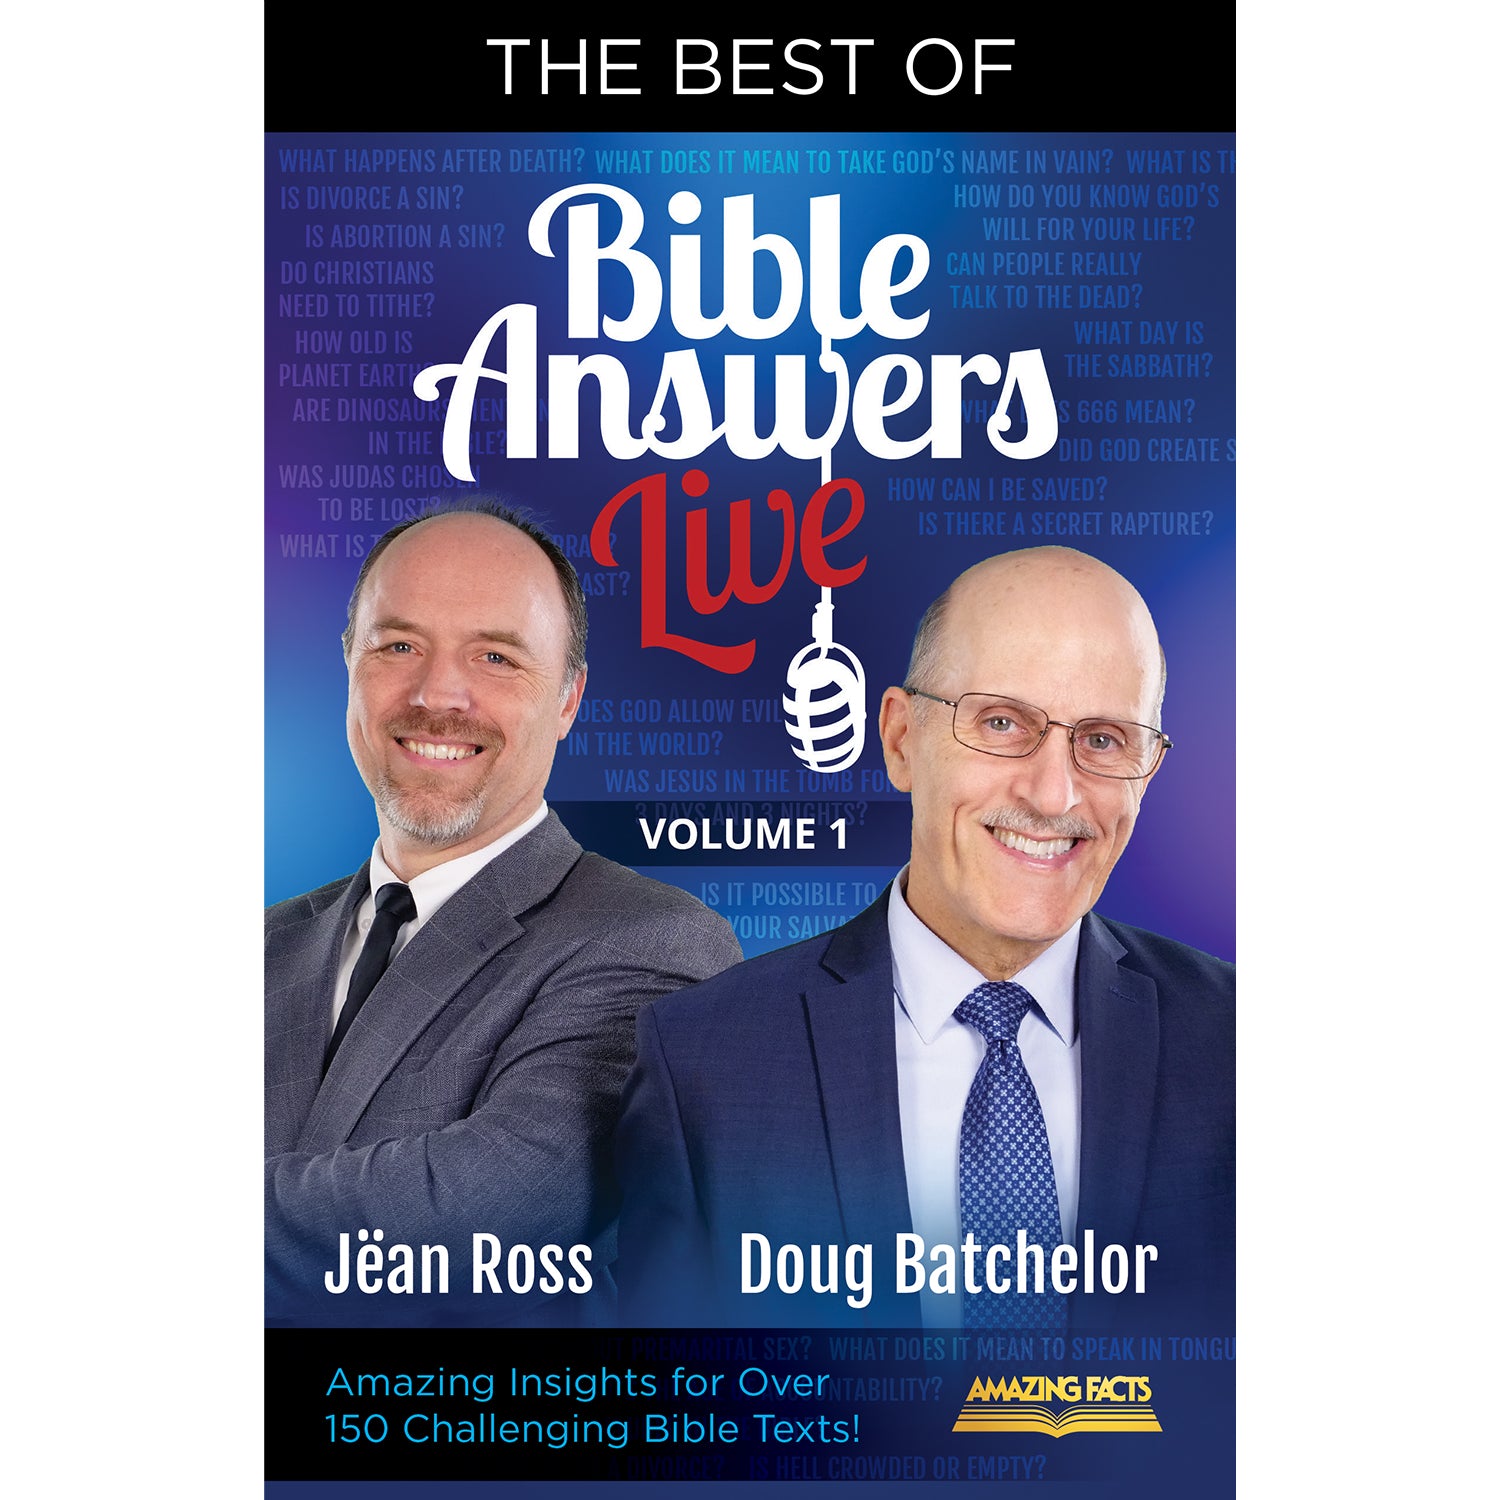 Best of Bible Answers Live Volume 1 by Doug Batchelor & Jean Ross